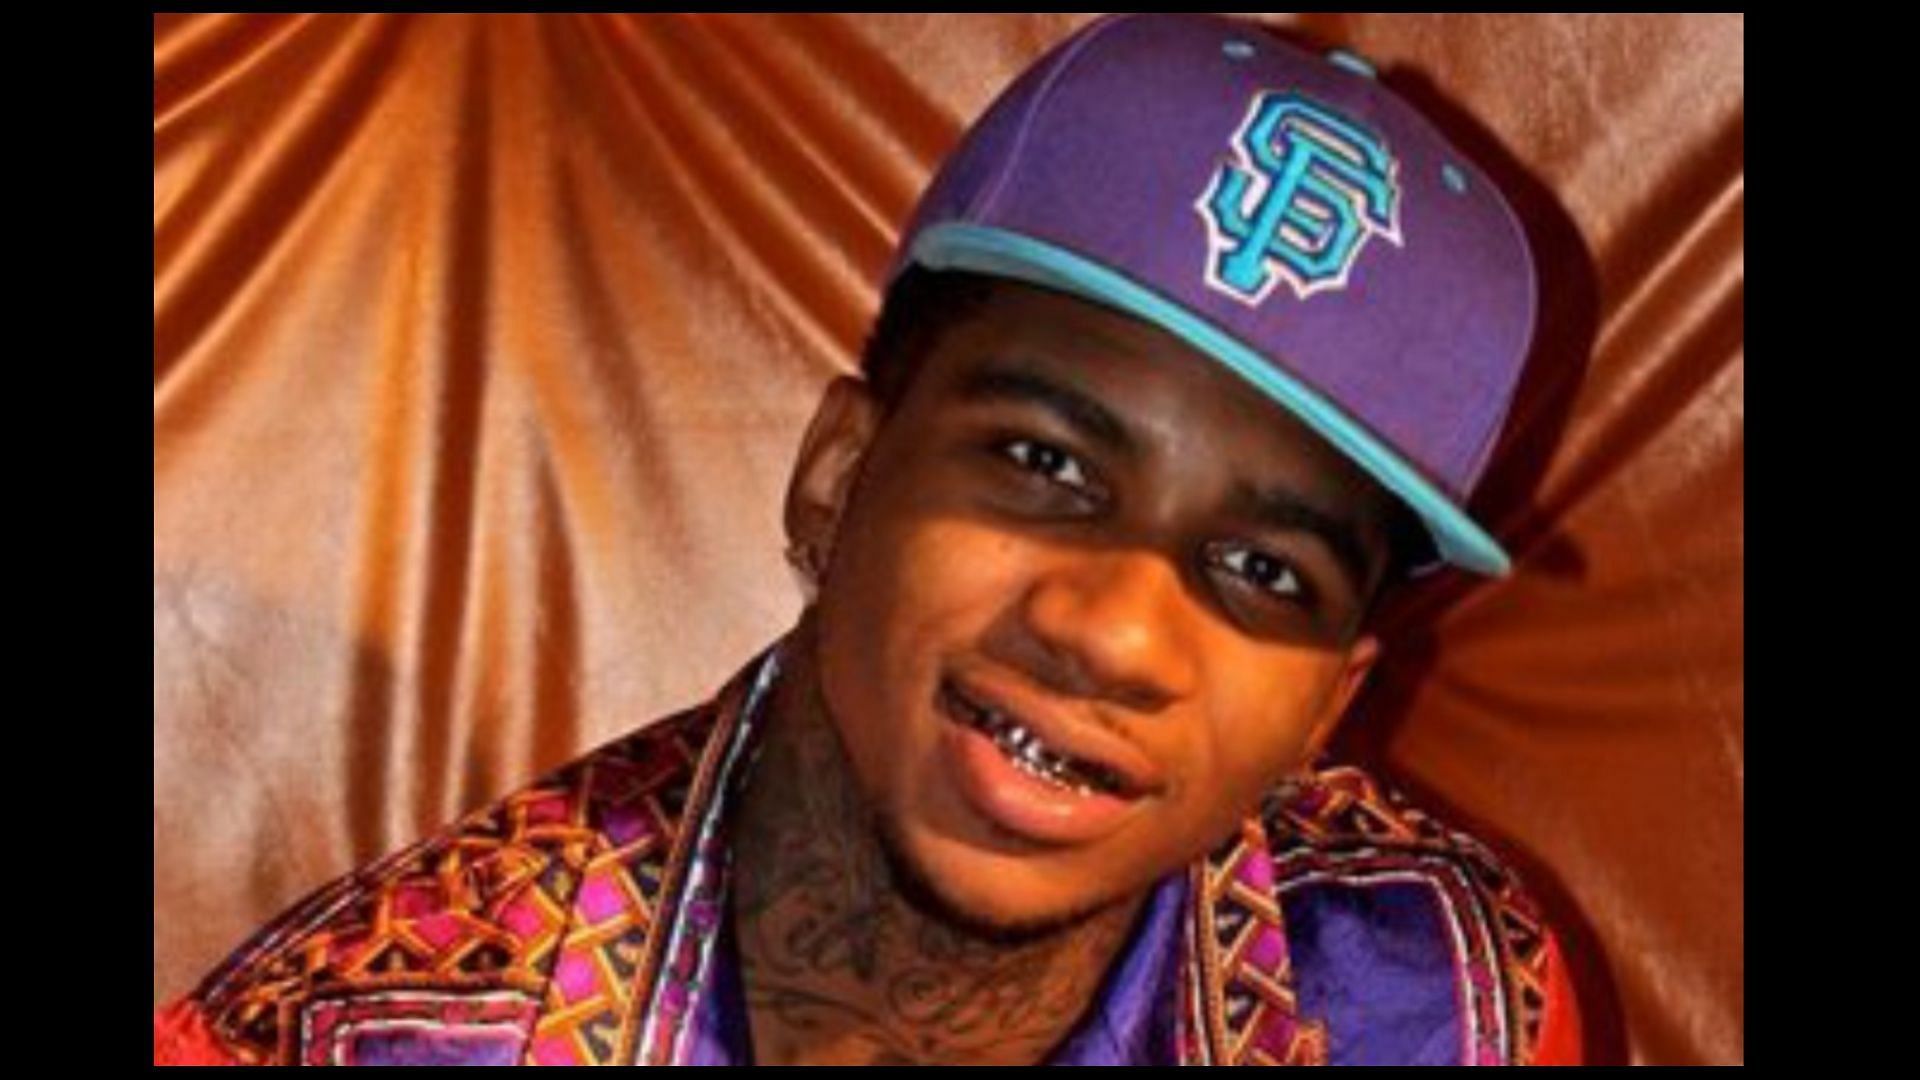 Lil B believes that hip-hop shouldn